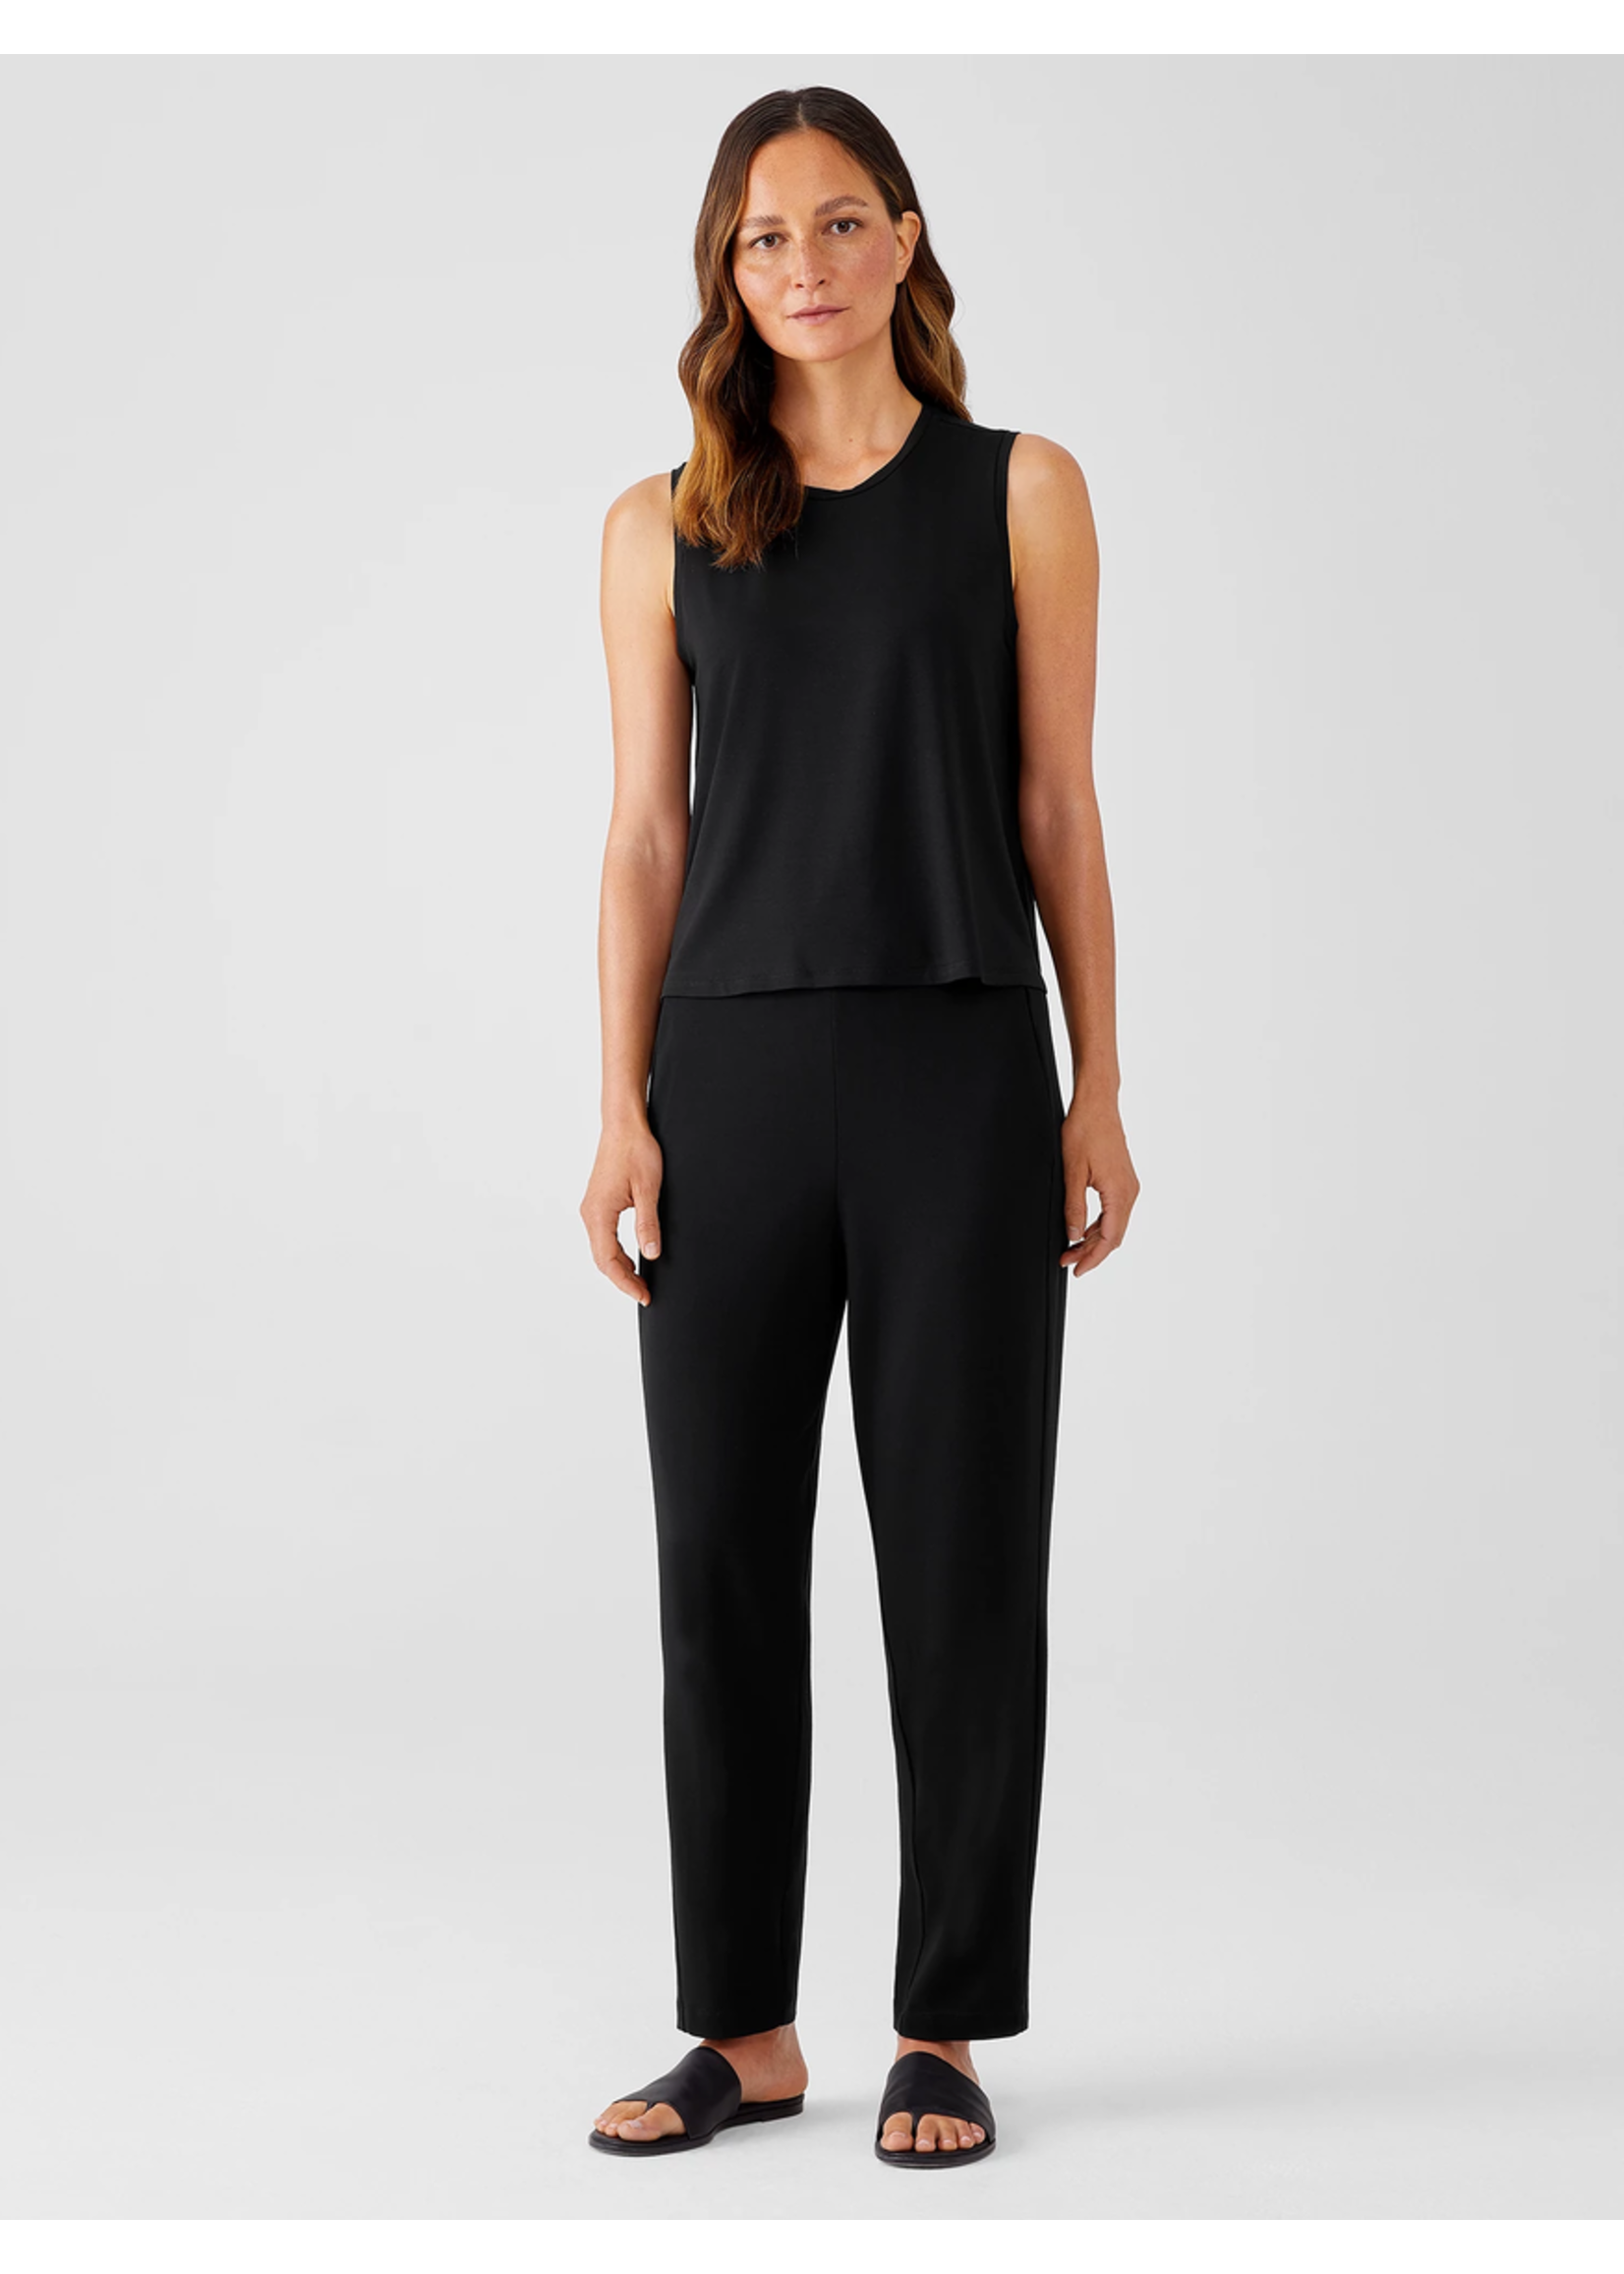 Eileen Fisher p4600 pant